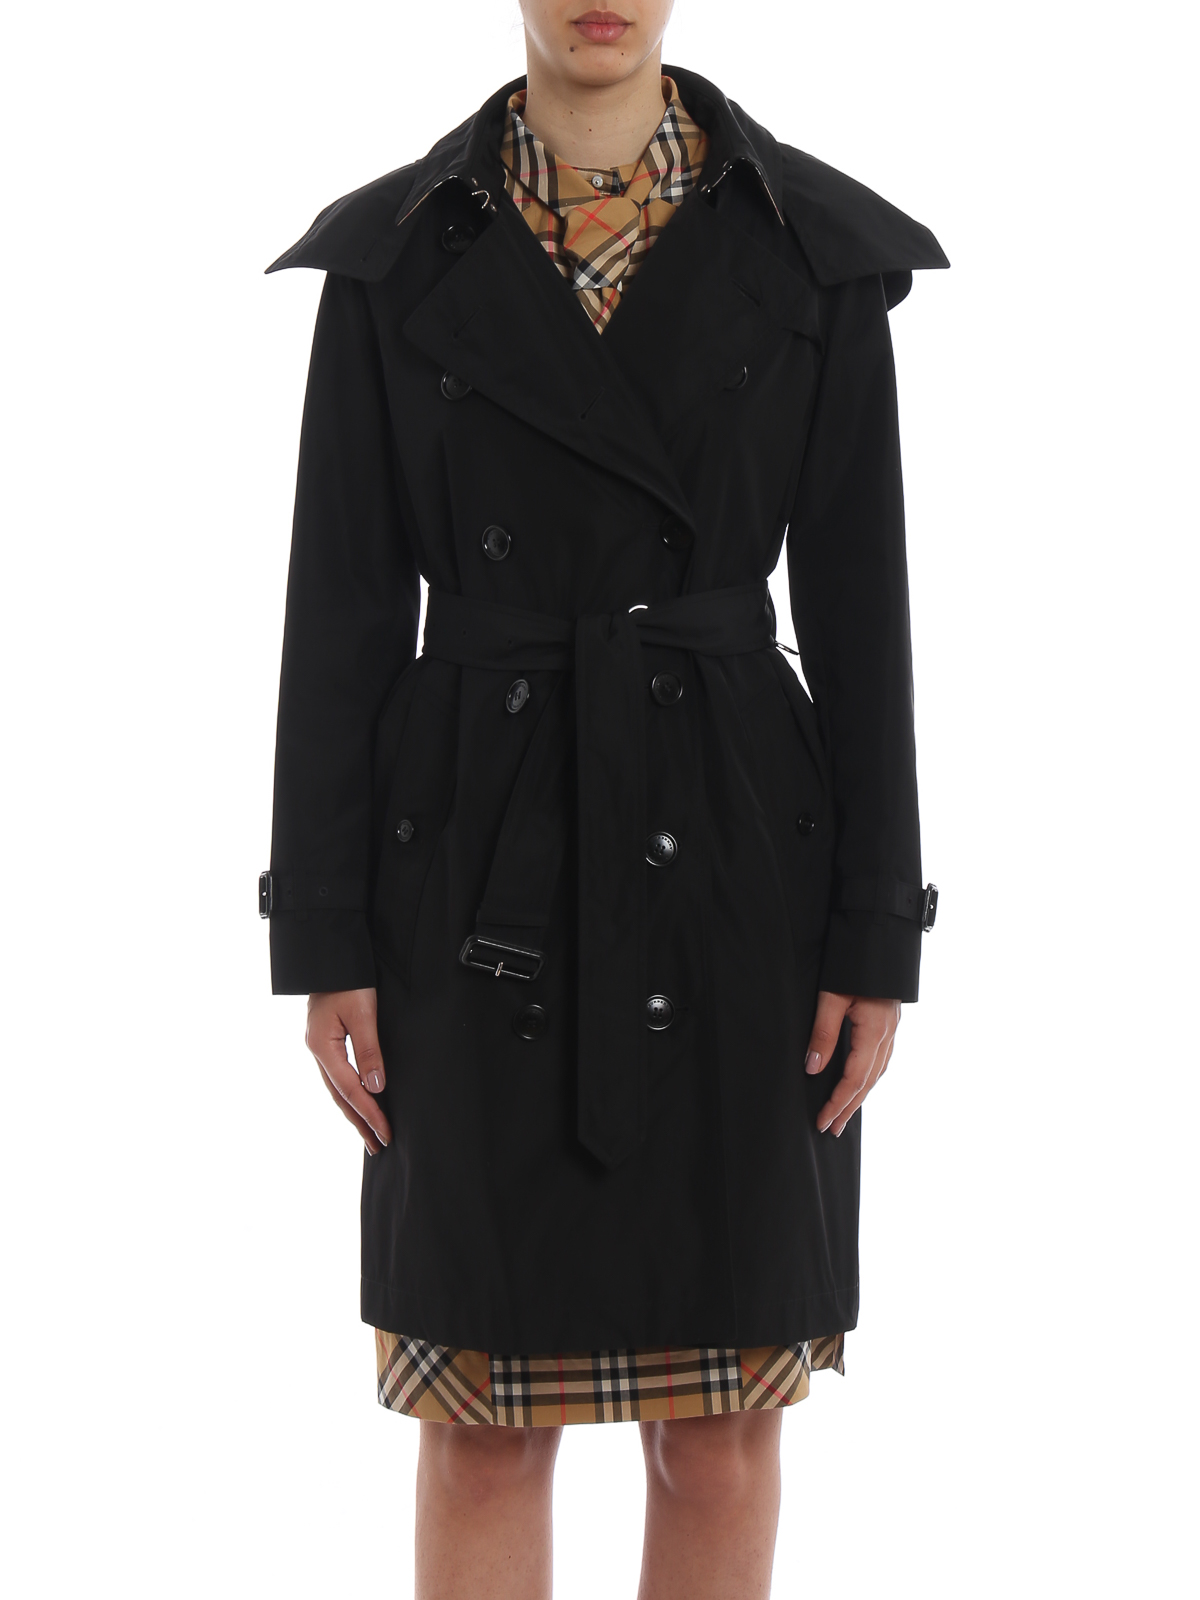 burberry trench coat fabric